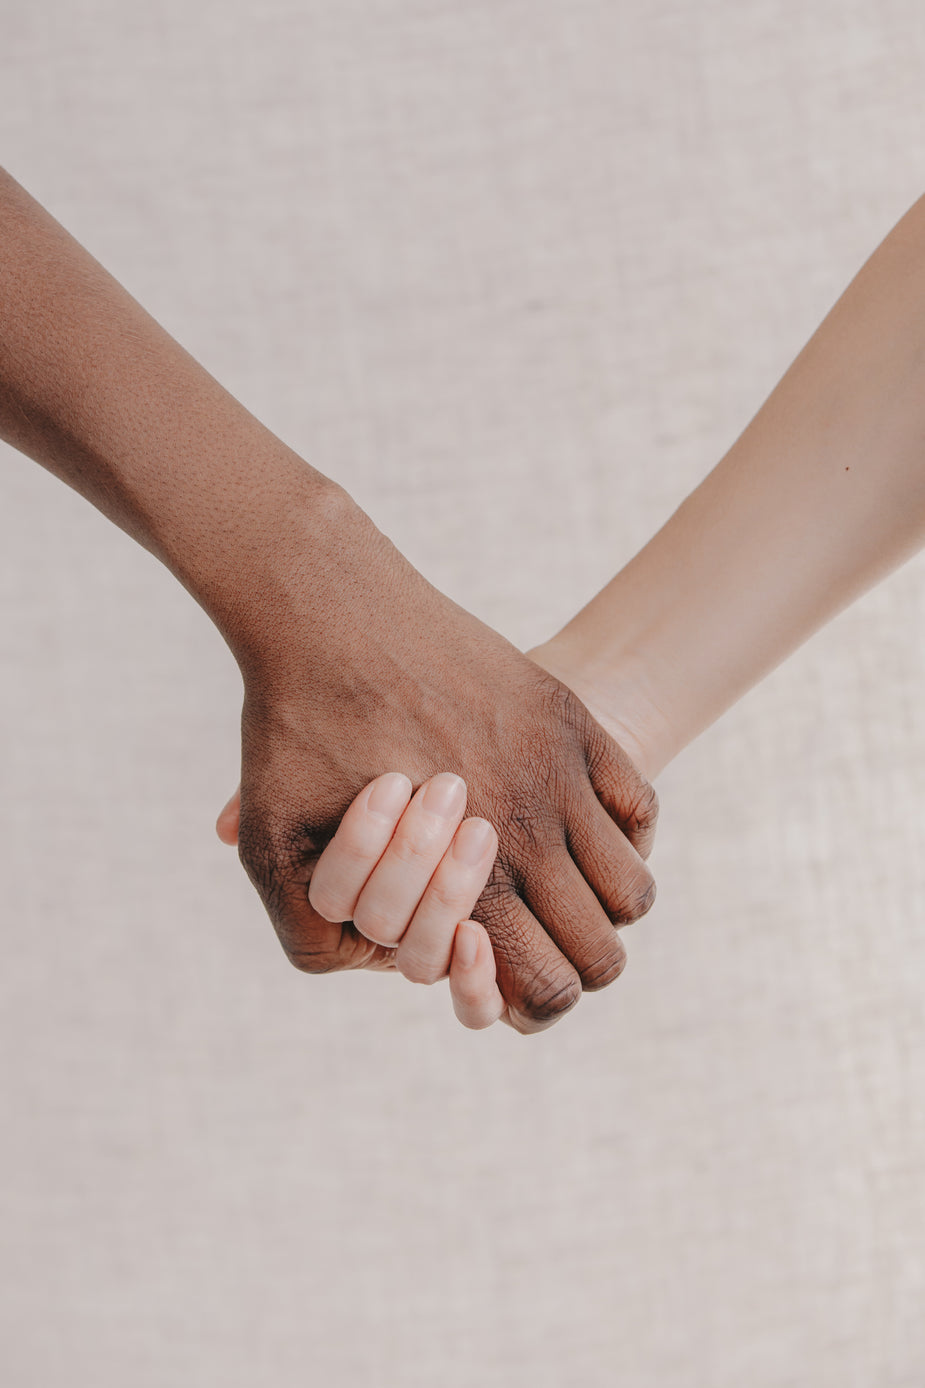 two hands together images